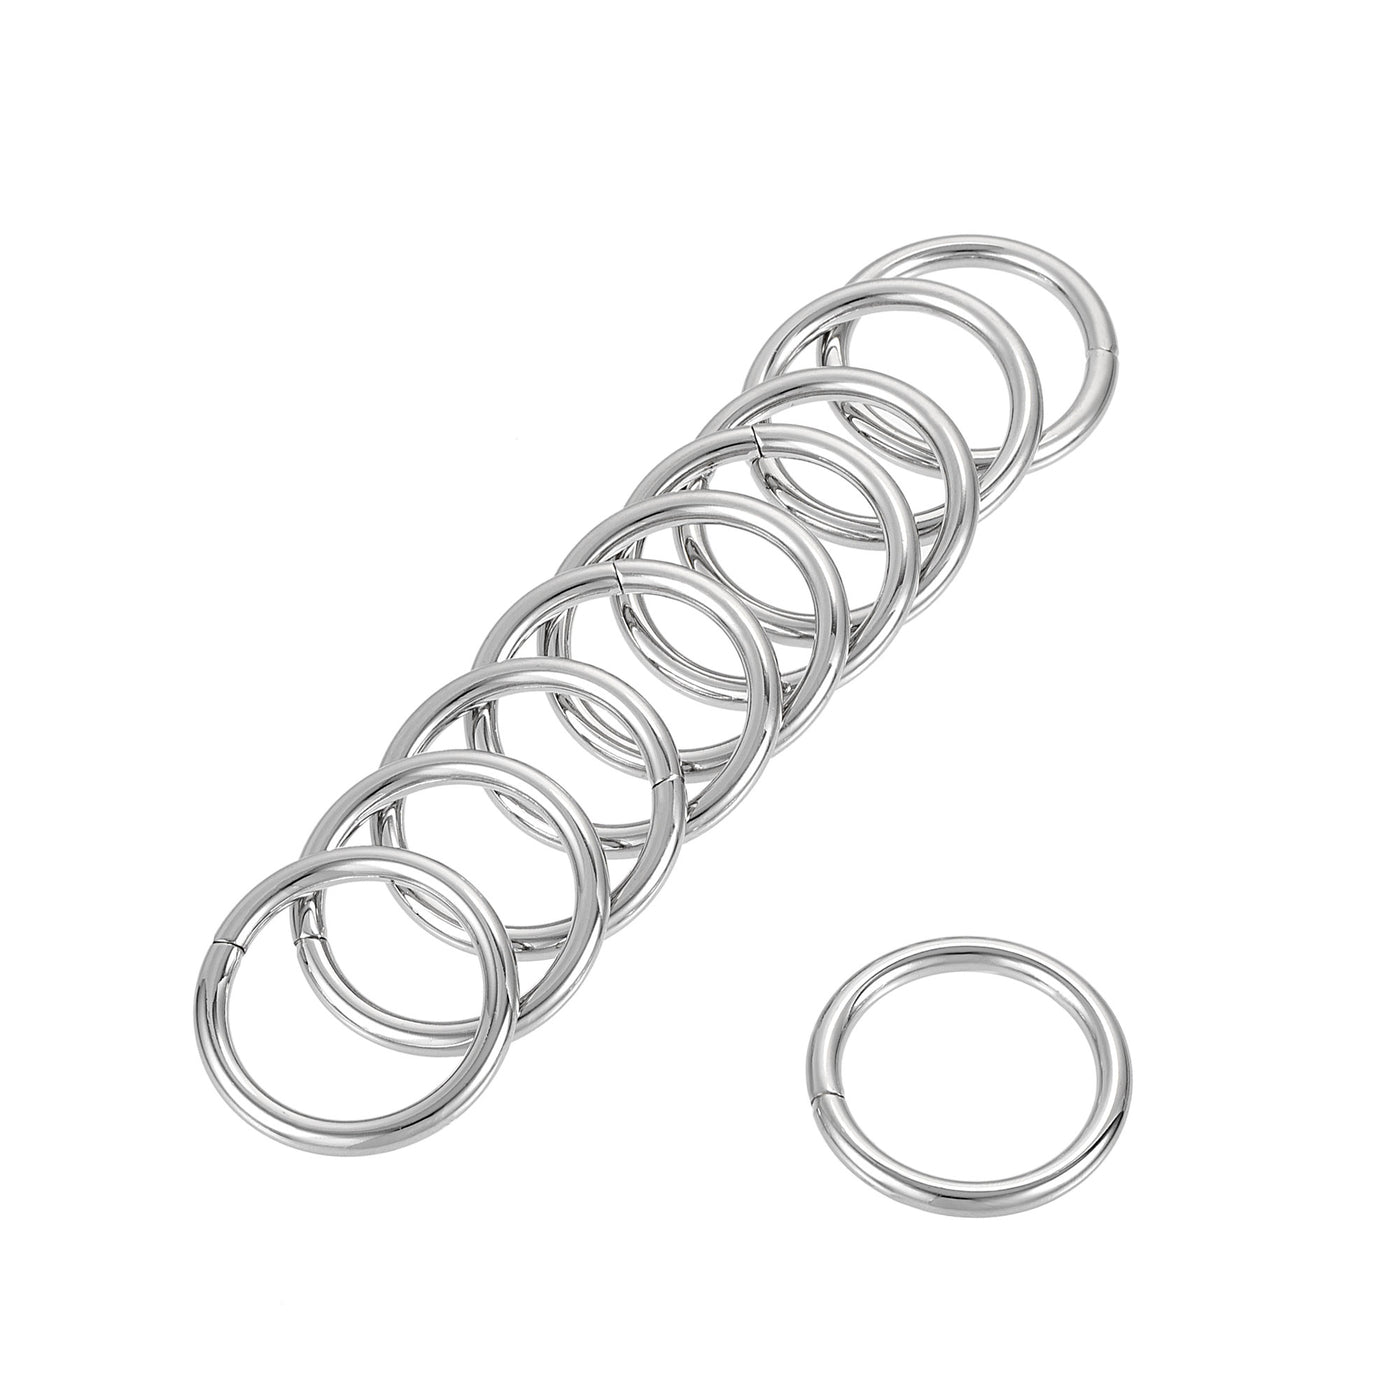 uxcell Uxcell Metal O Ring 25mm(0.98") ID 3.8mm Thickness Non-Welded Rings Silver Tone 15pcs